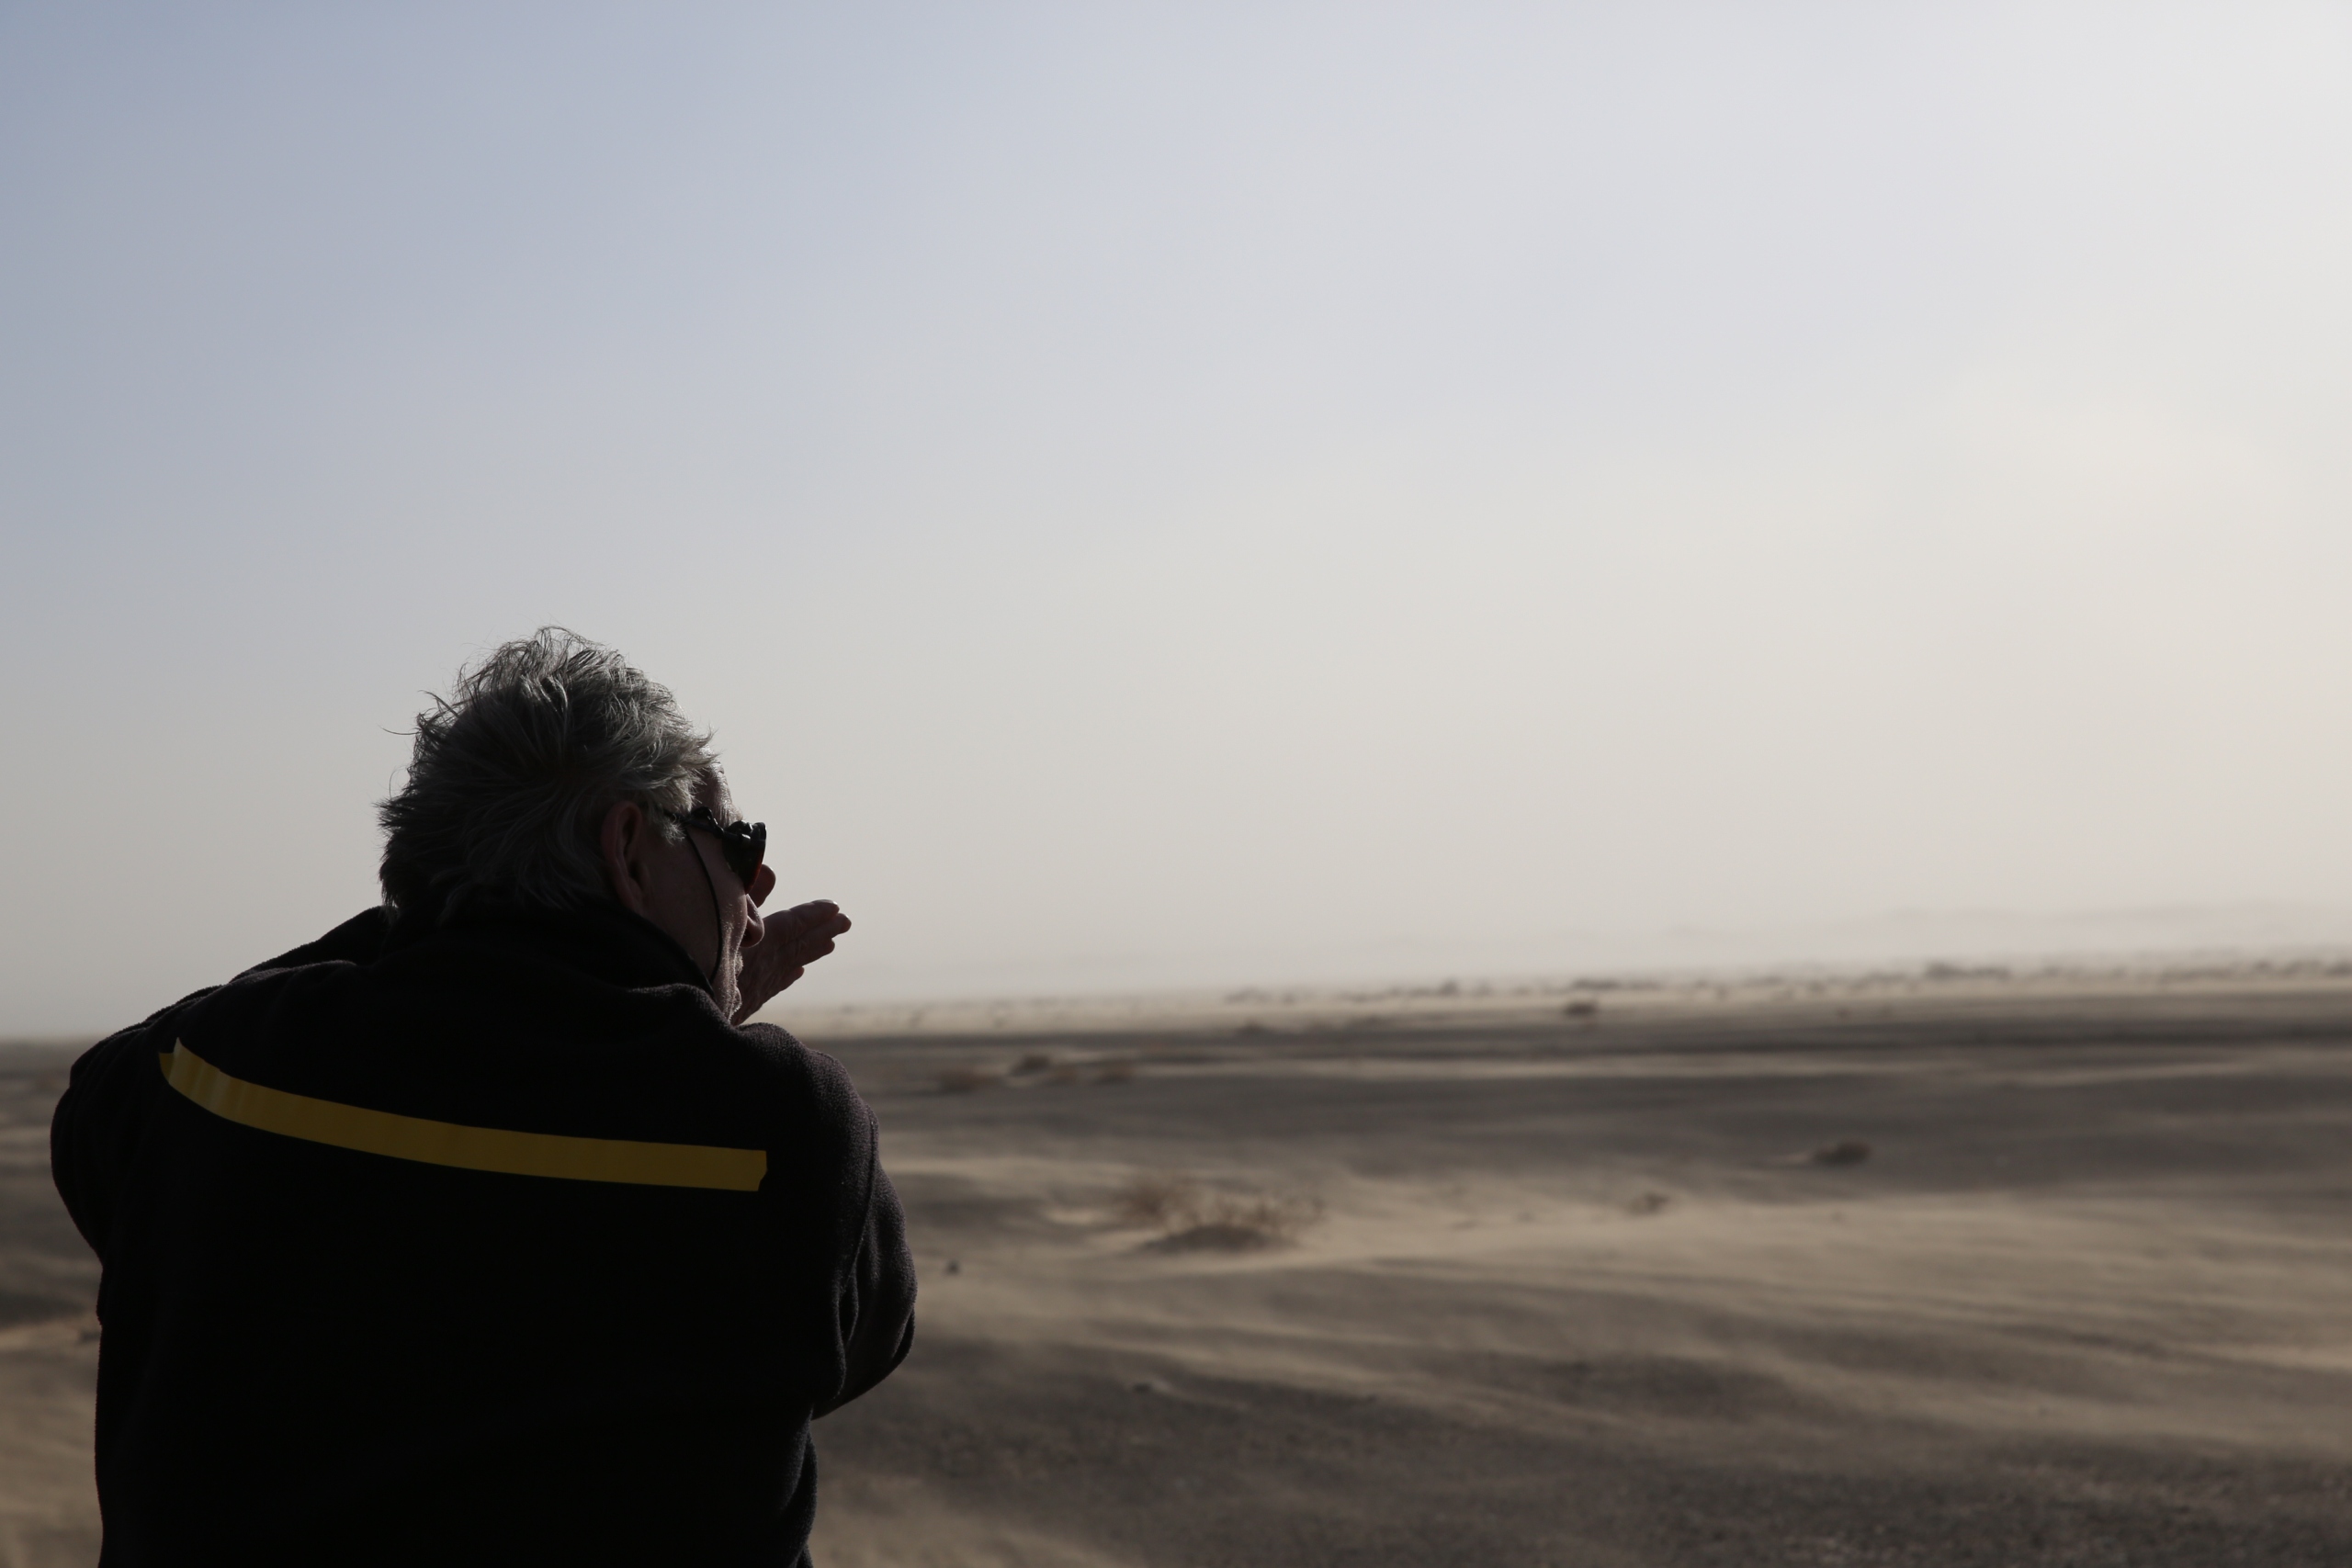 The director in profile, standing on a dune and looking into the distance. He is dressed in dark clothes.